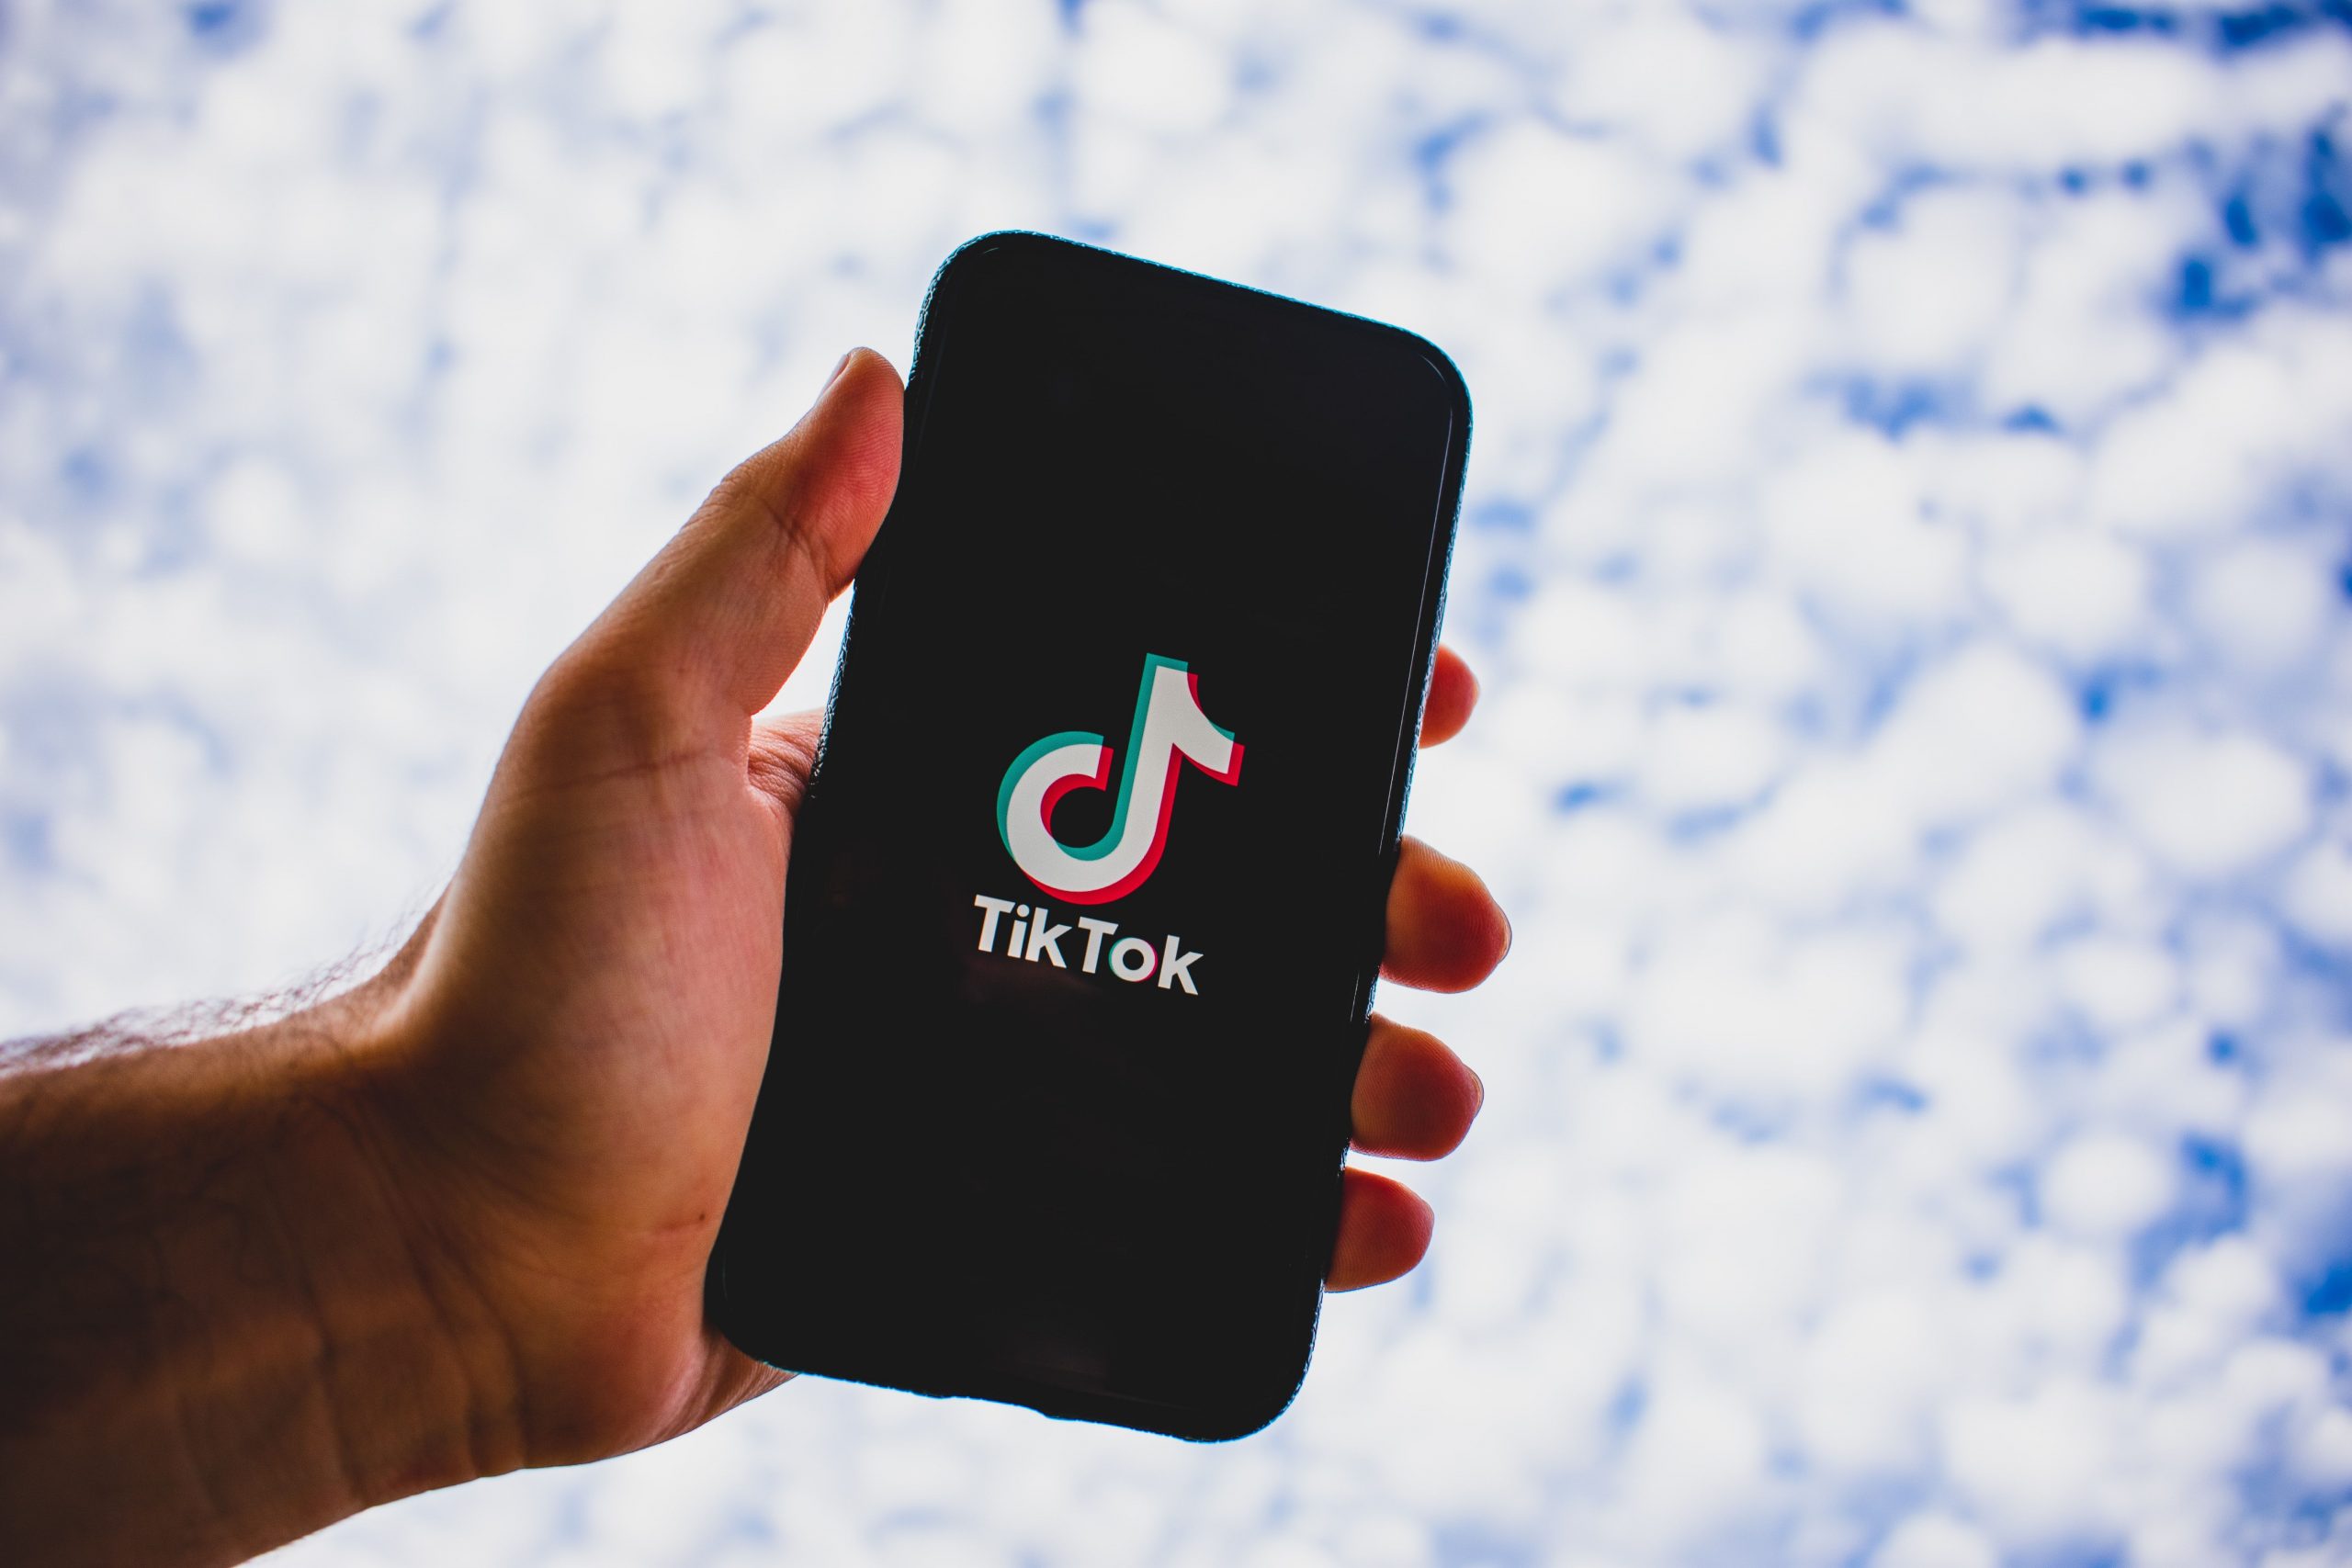 China says US abusing ‘national power’ by trying to ban TikTok